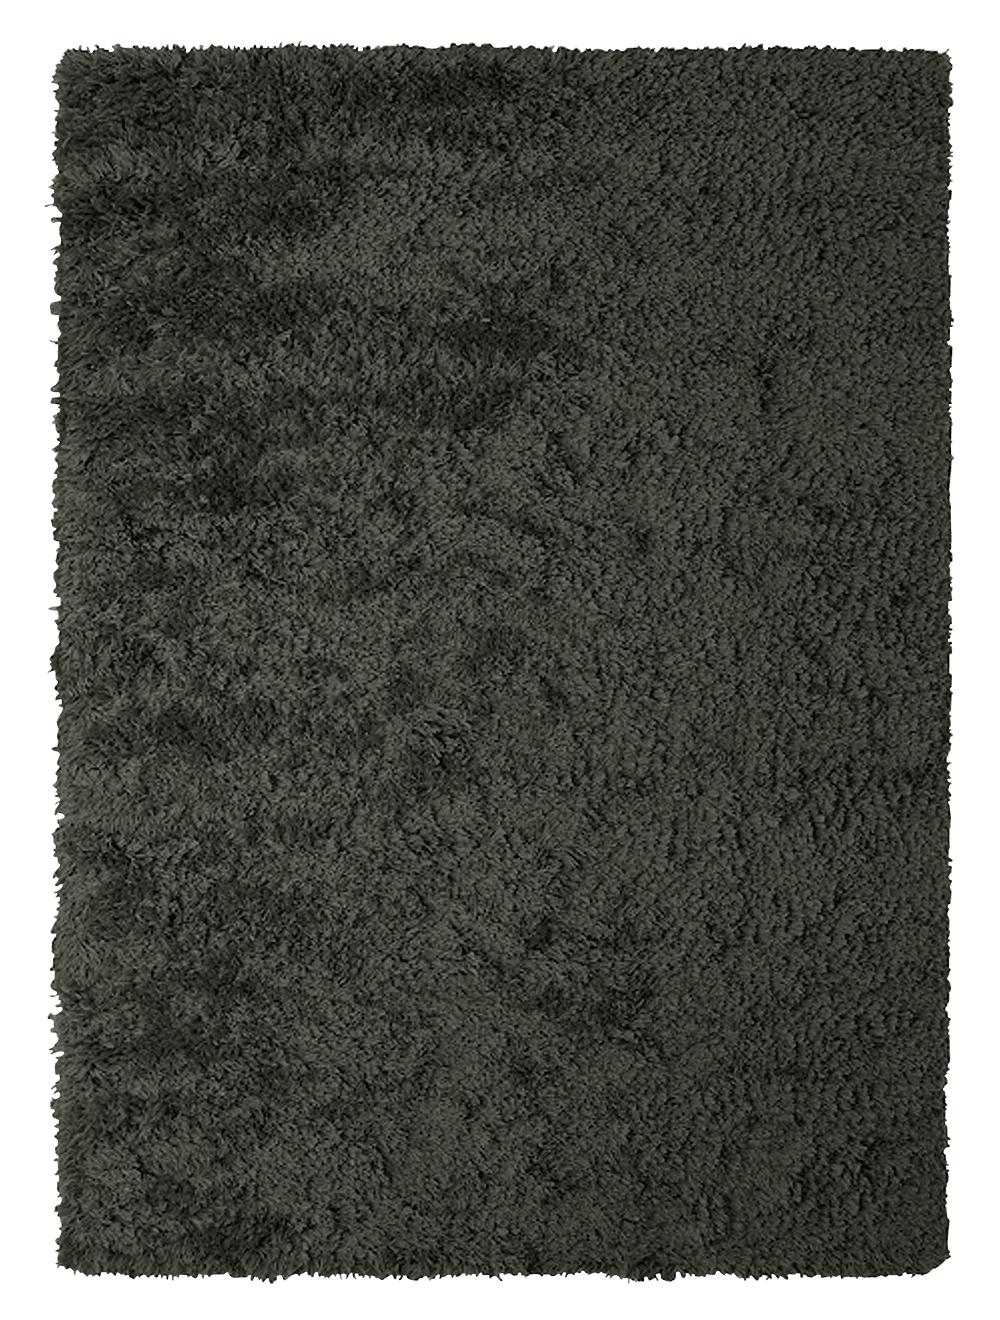 Charcoal Rya carpet by Massimo Copenhagen.
Handwoven
Materials: 100% New Zealand wool.
Dimensions: W 200 x H 300 cm.
Available colors: Cream, charcoal, soft grey, and nougat brown.
Other dimensions are available: 140x200 cm, 170x240 cm, and